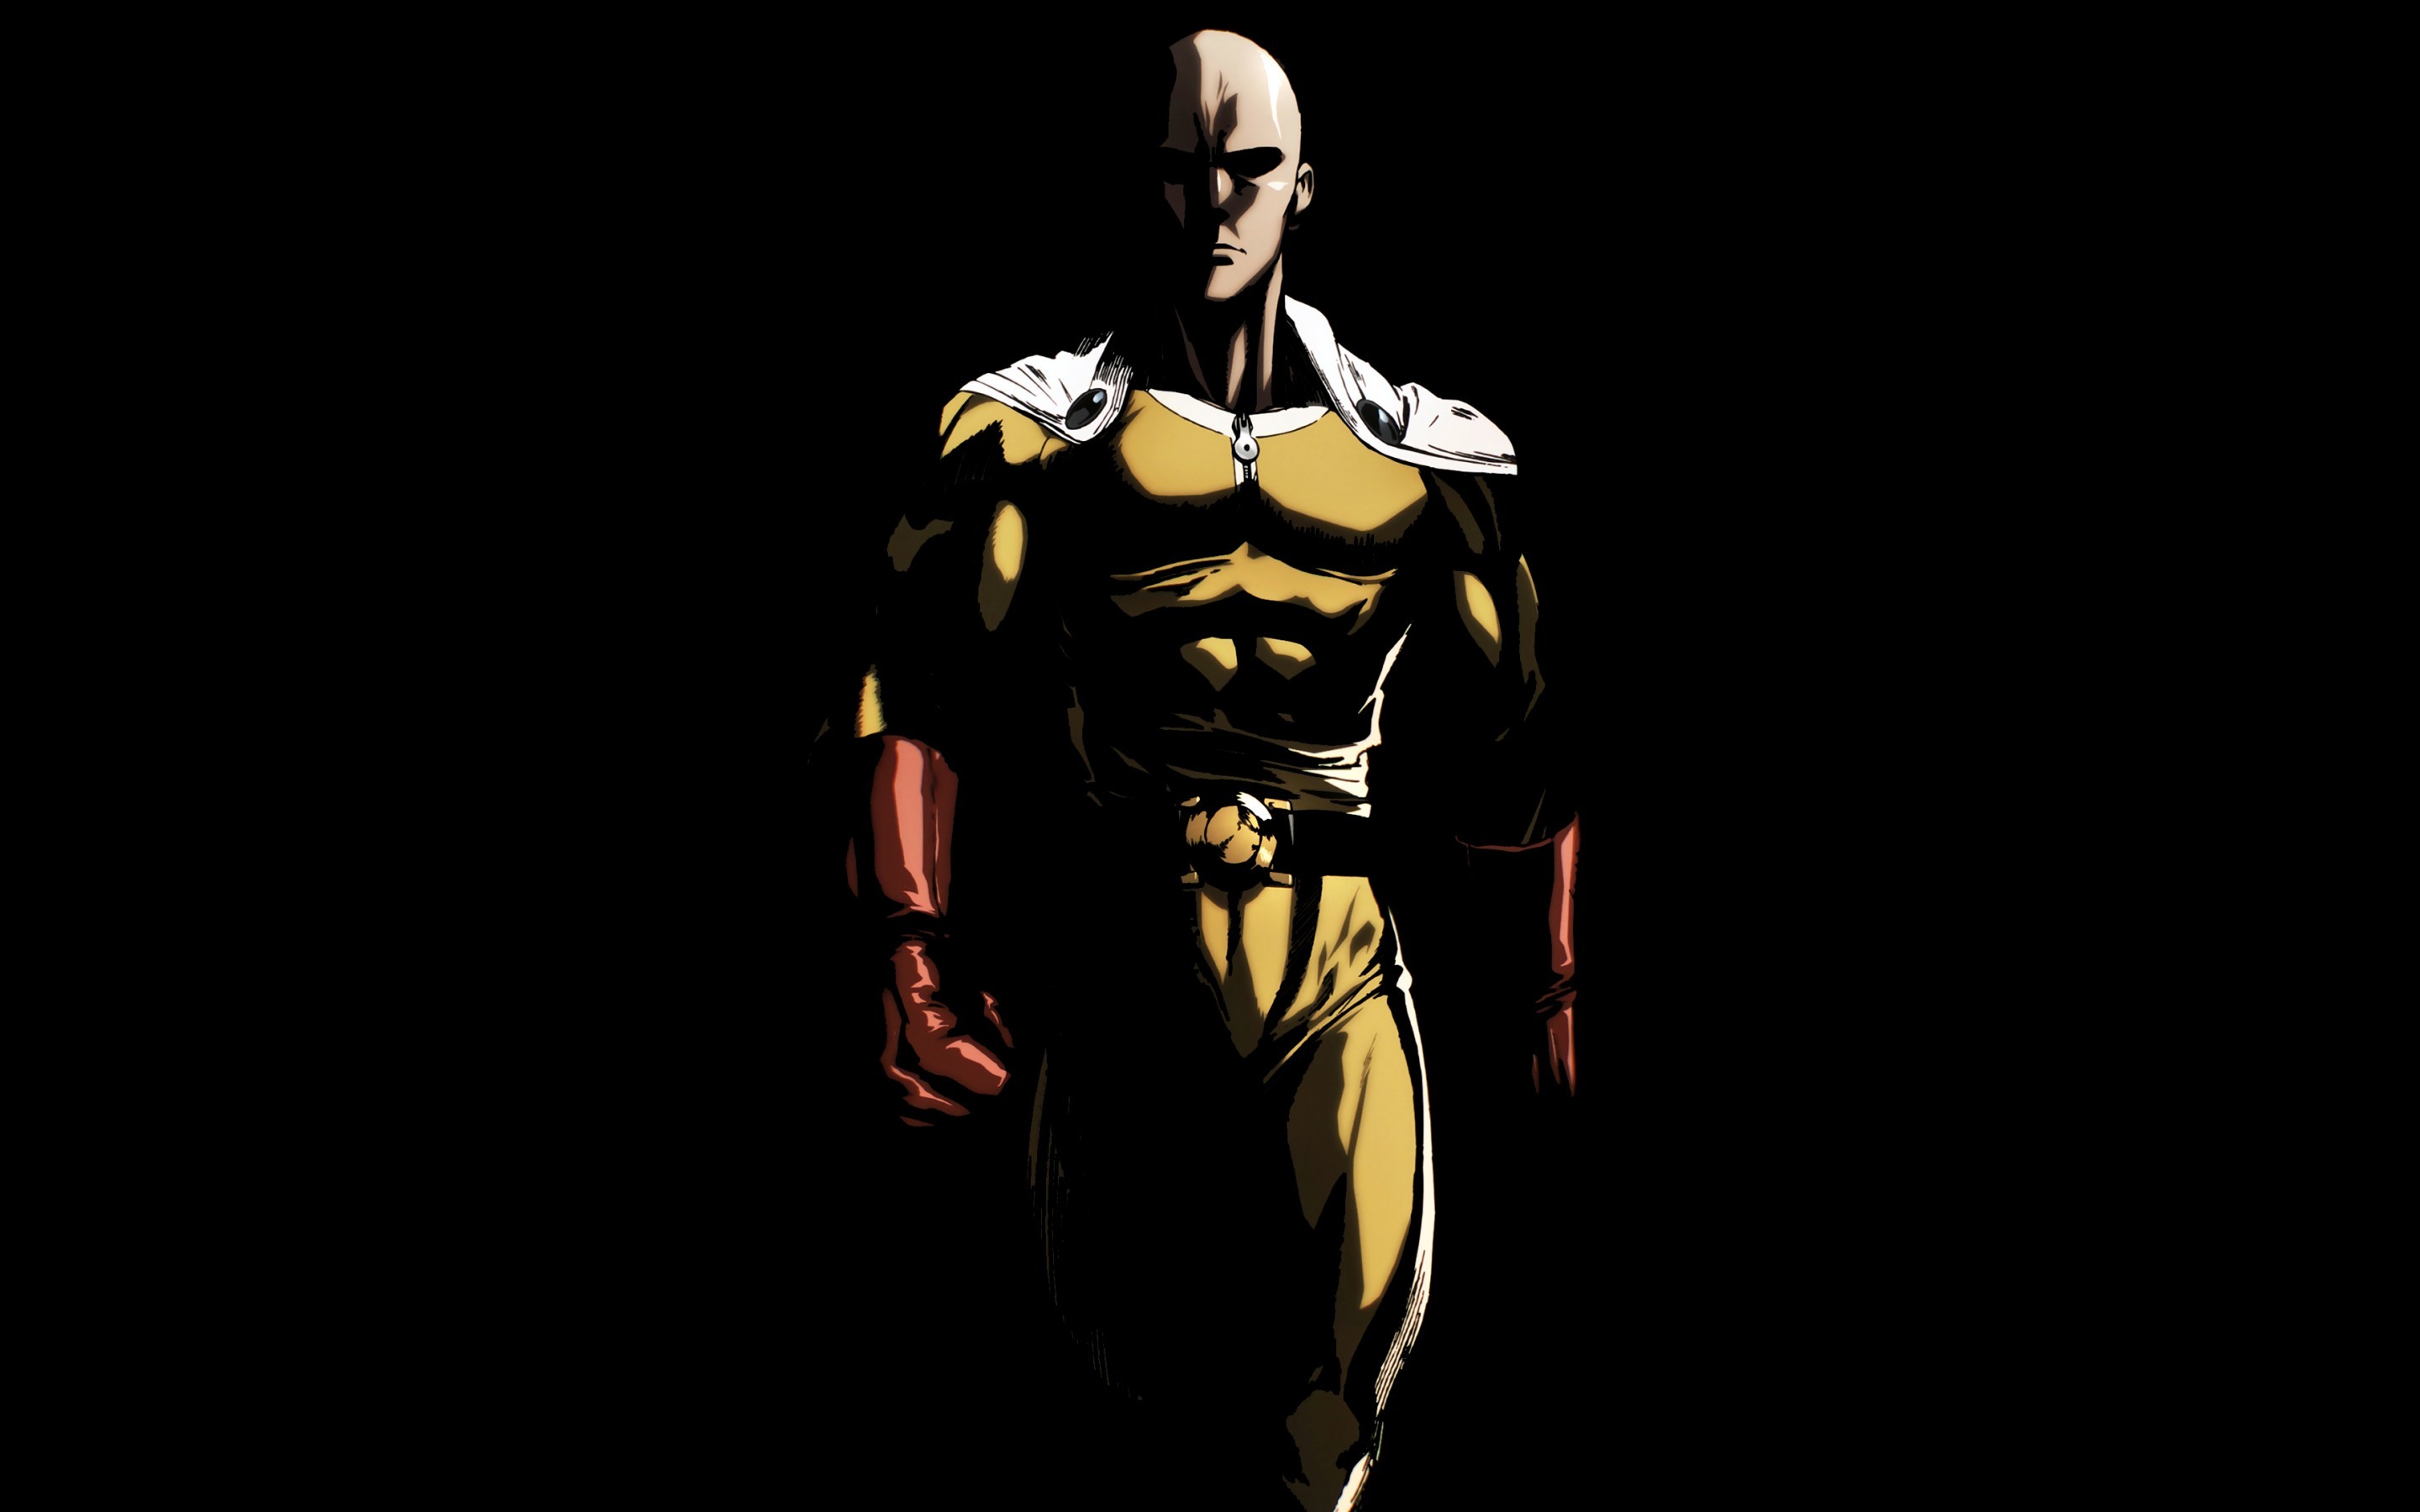 9. "Saitama" from One Punch Man - wide 8